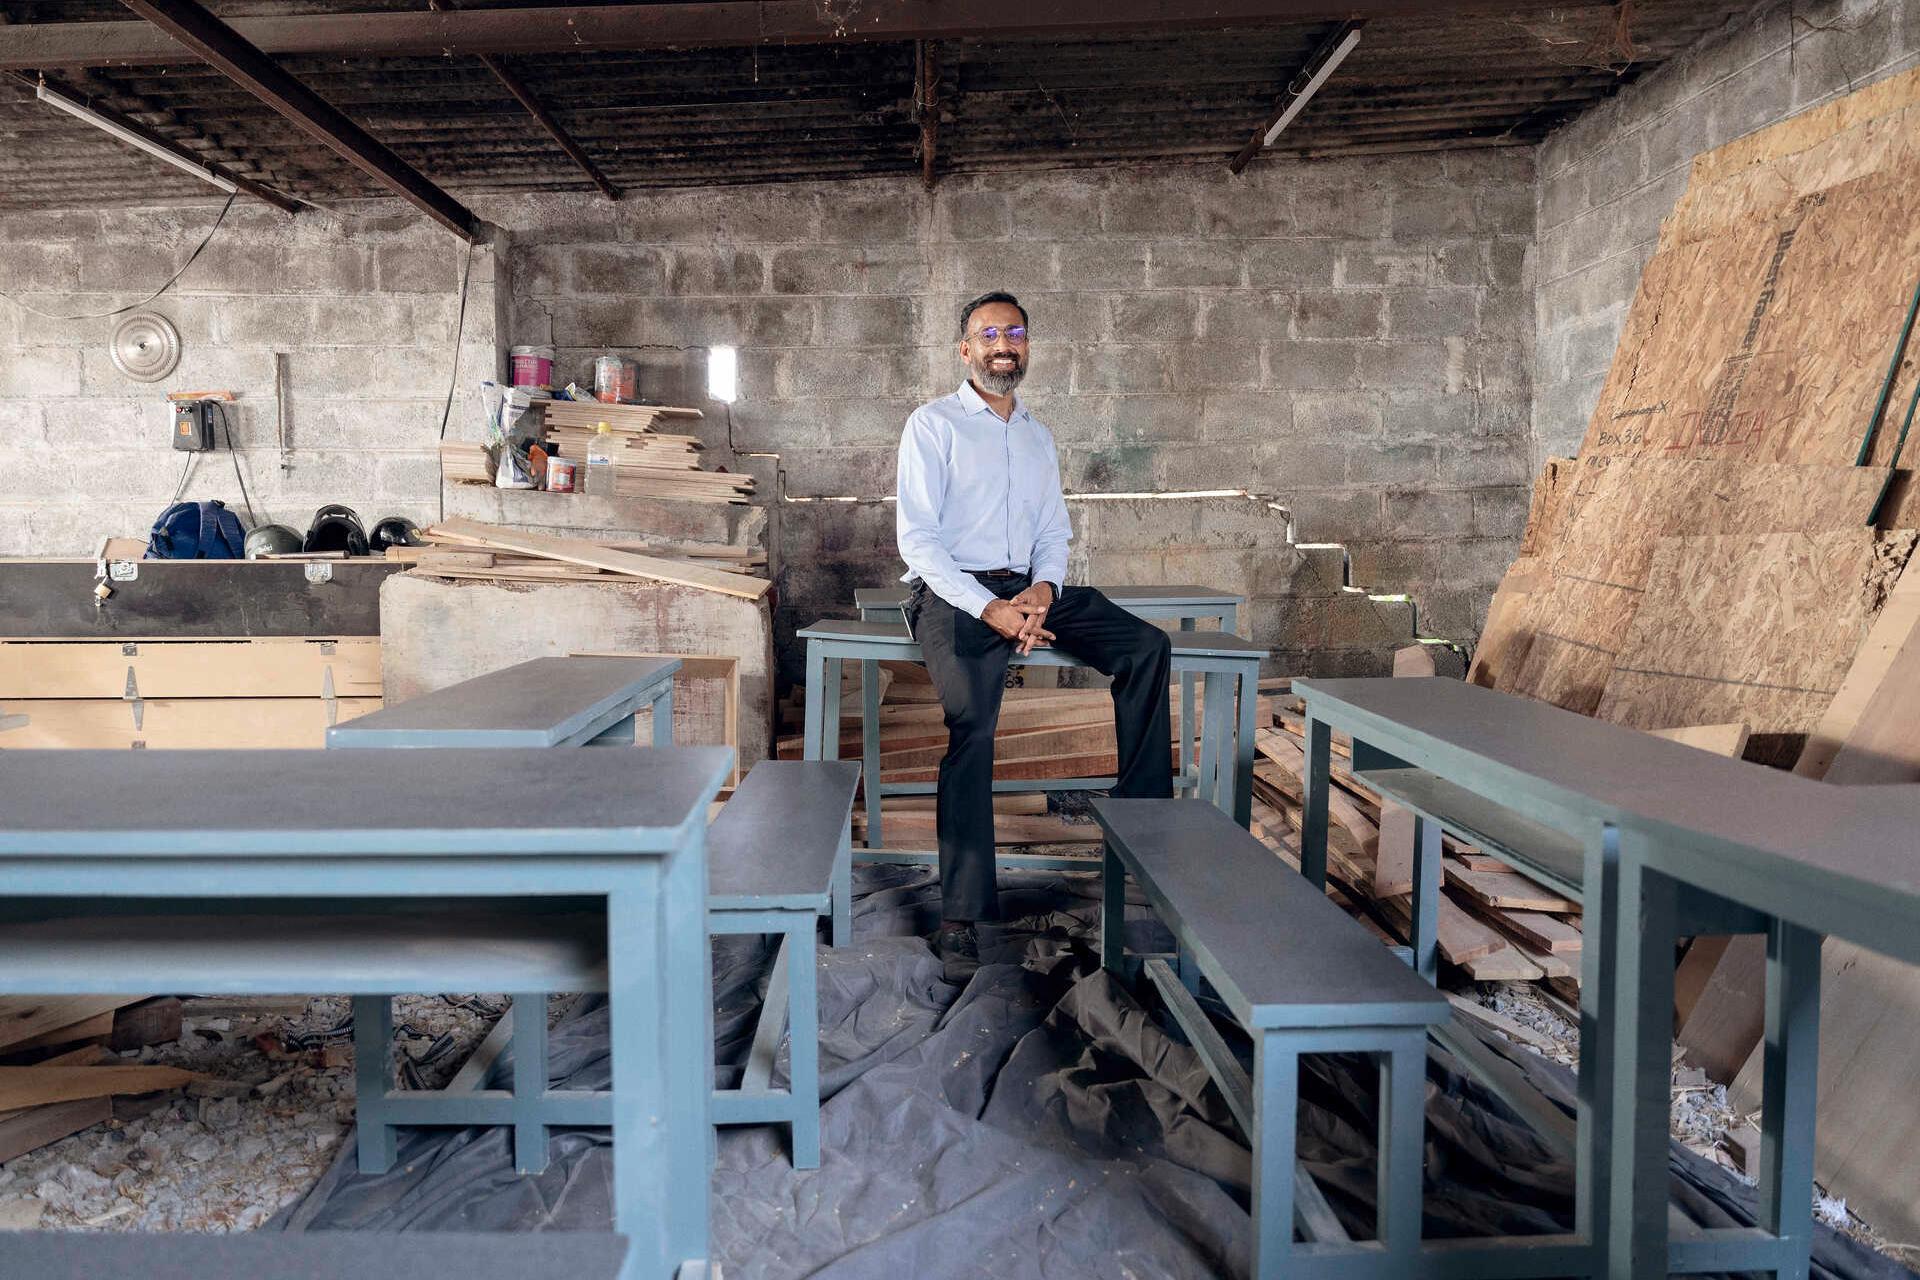 Manoj Sharma sits on a bench in the wood workshop